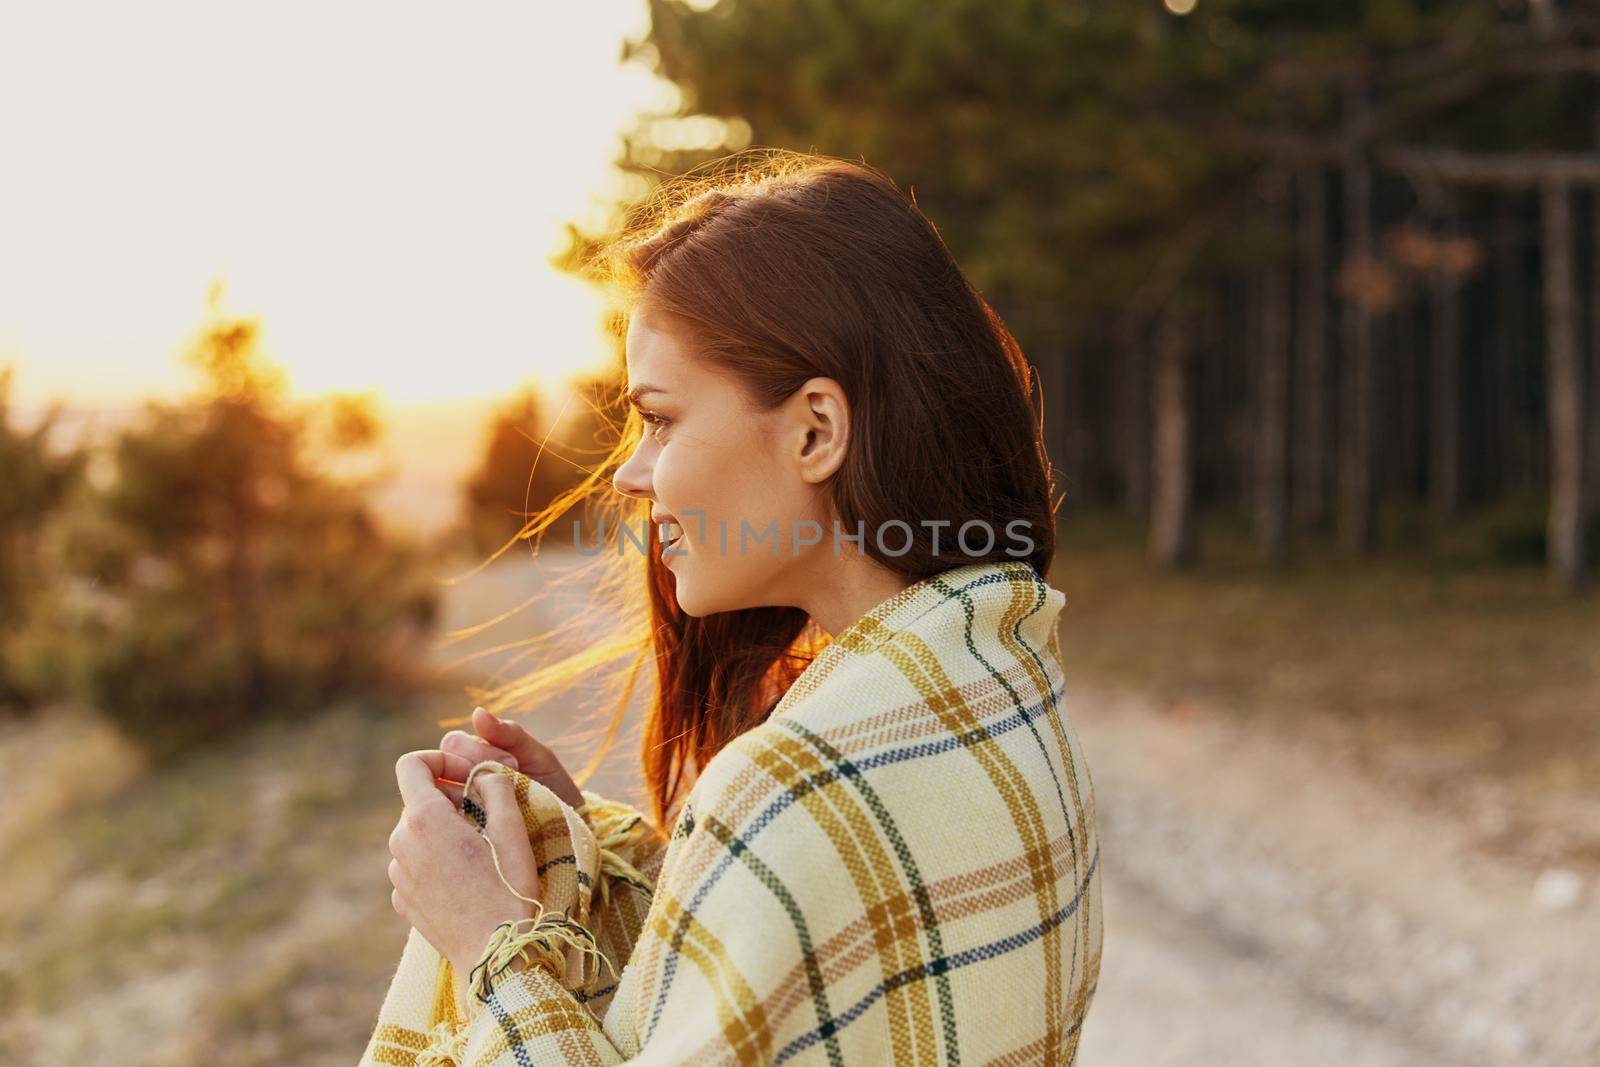 Joyful traveler on a path in the forest with a plaid blanket on her shoulders. High quality photo